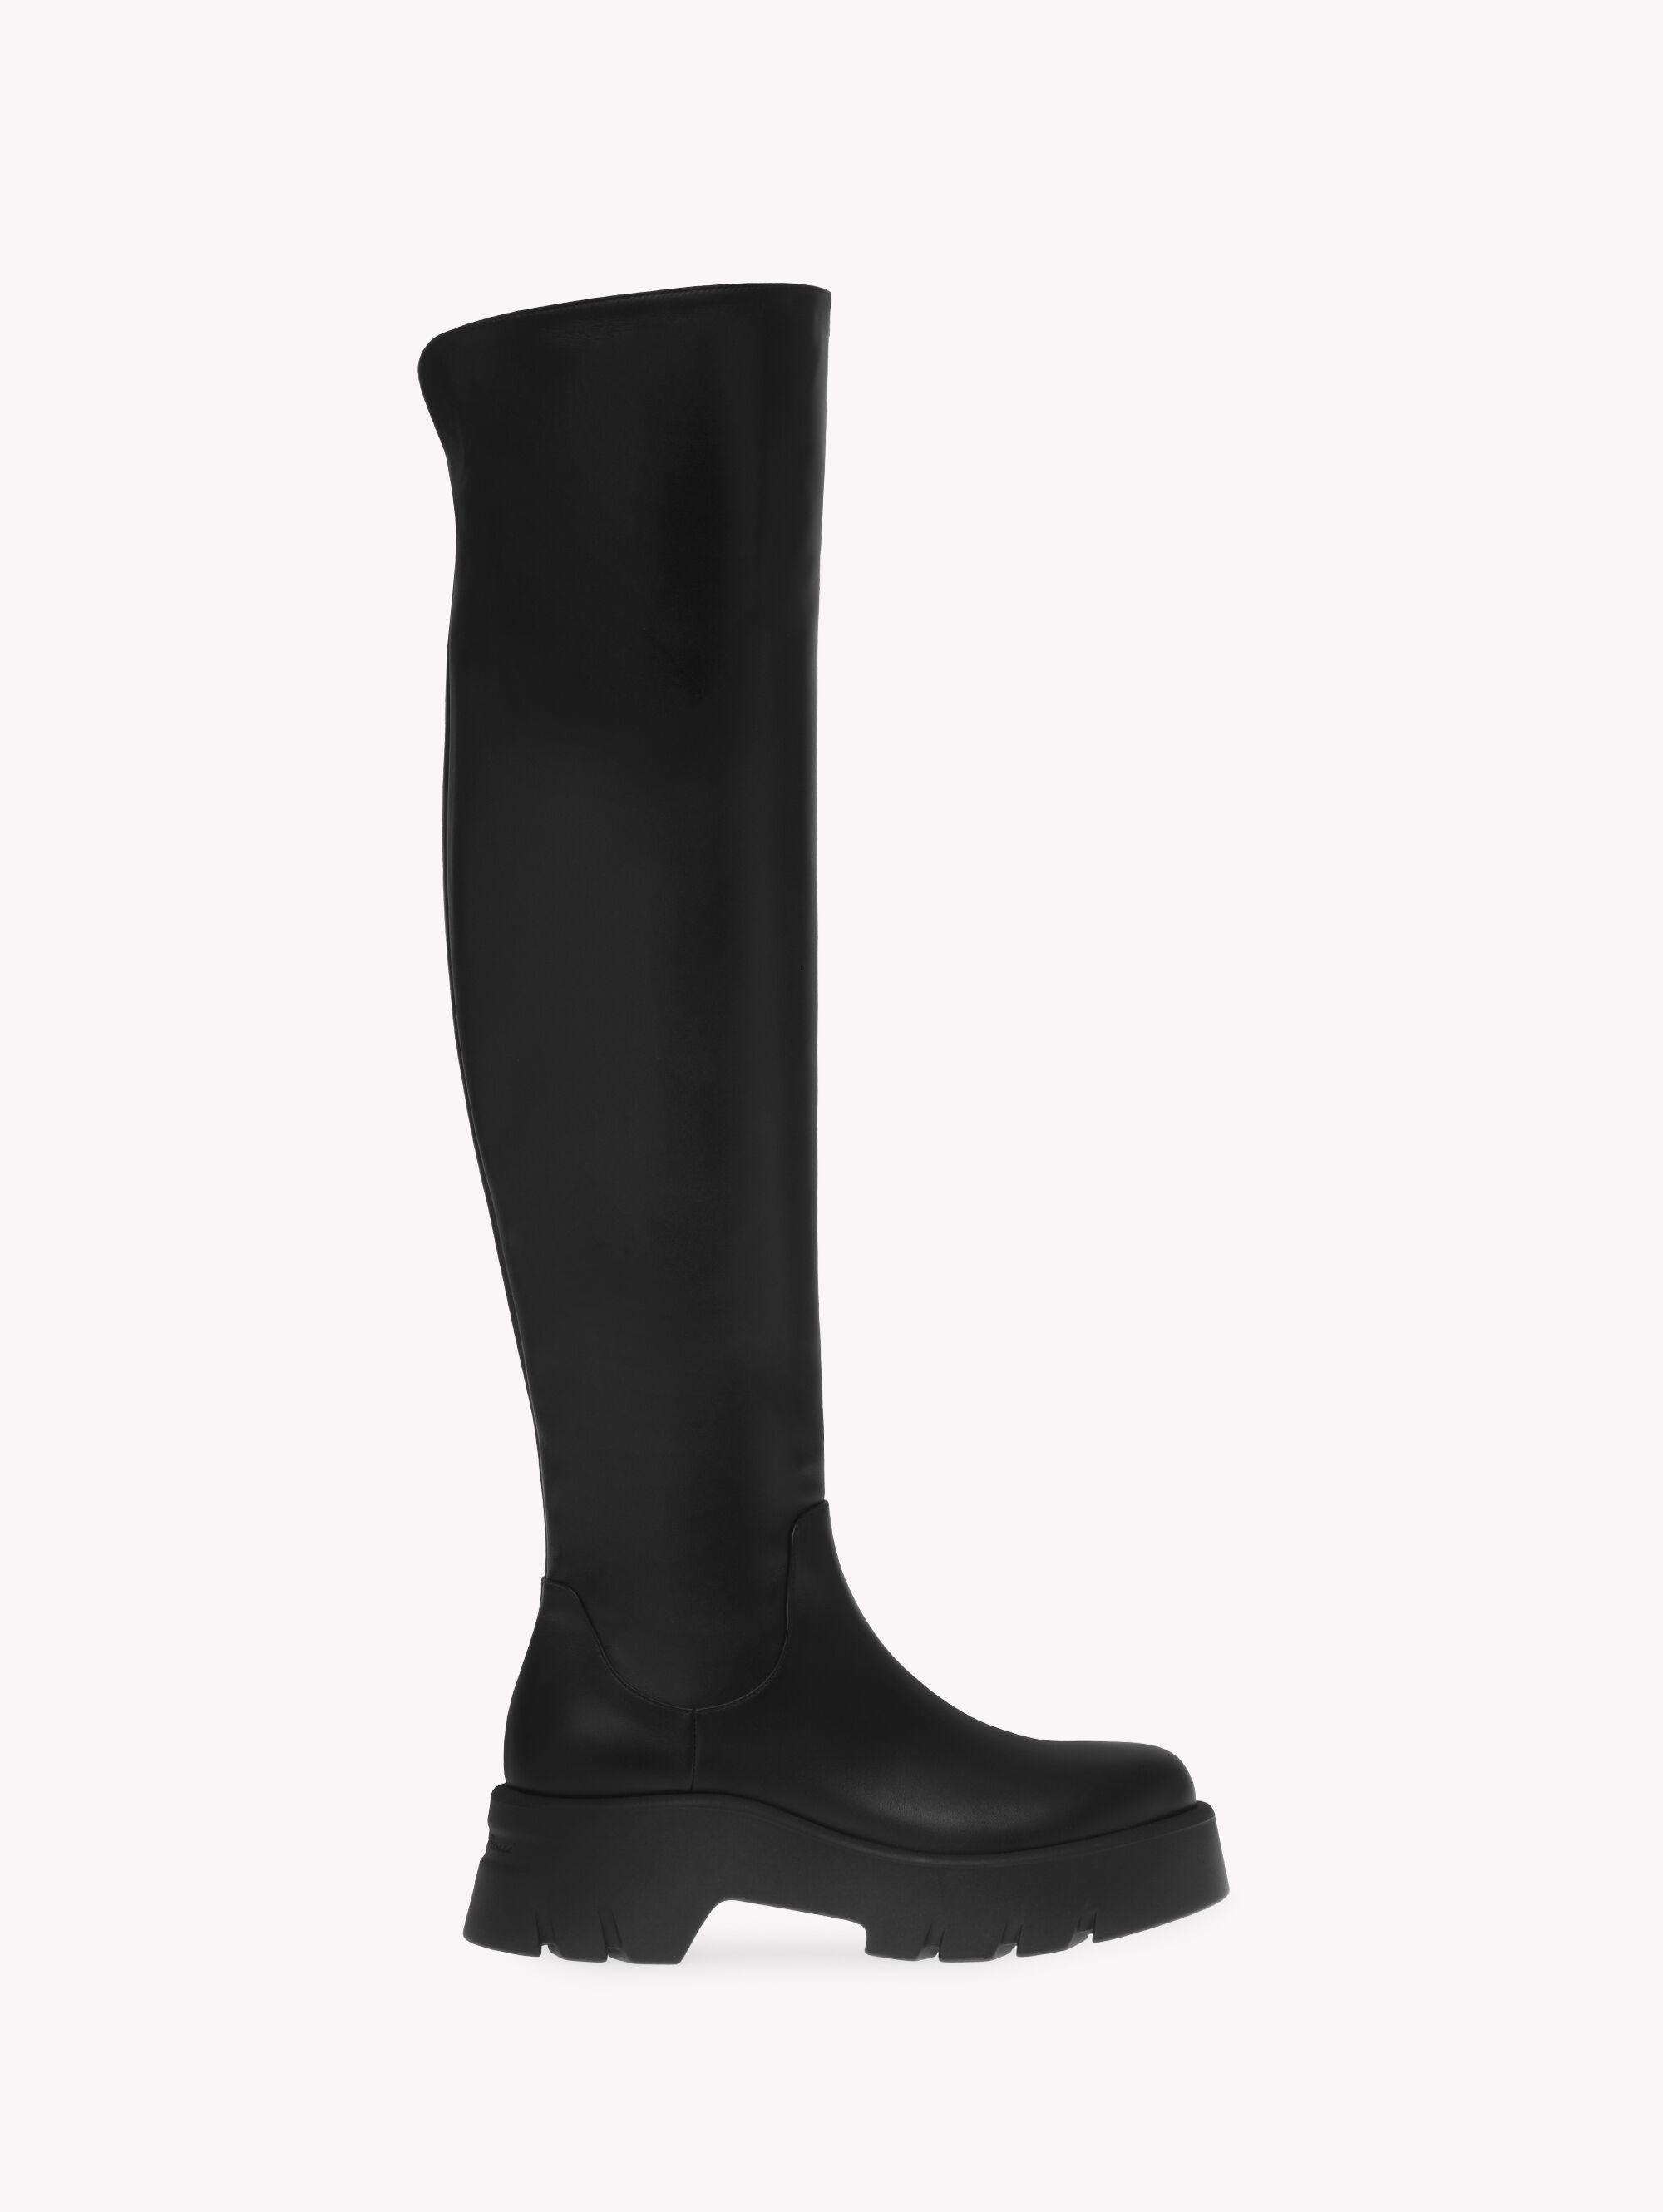 Luxury Boots for Women | Gianvito Rossi